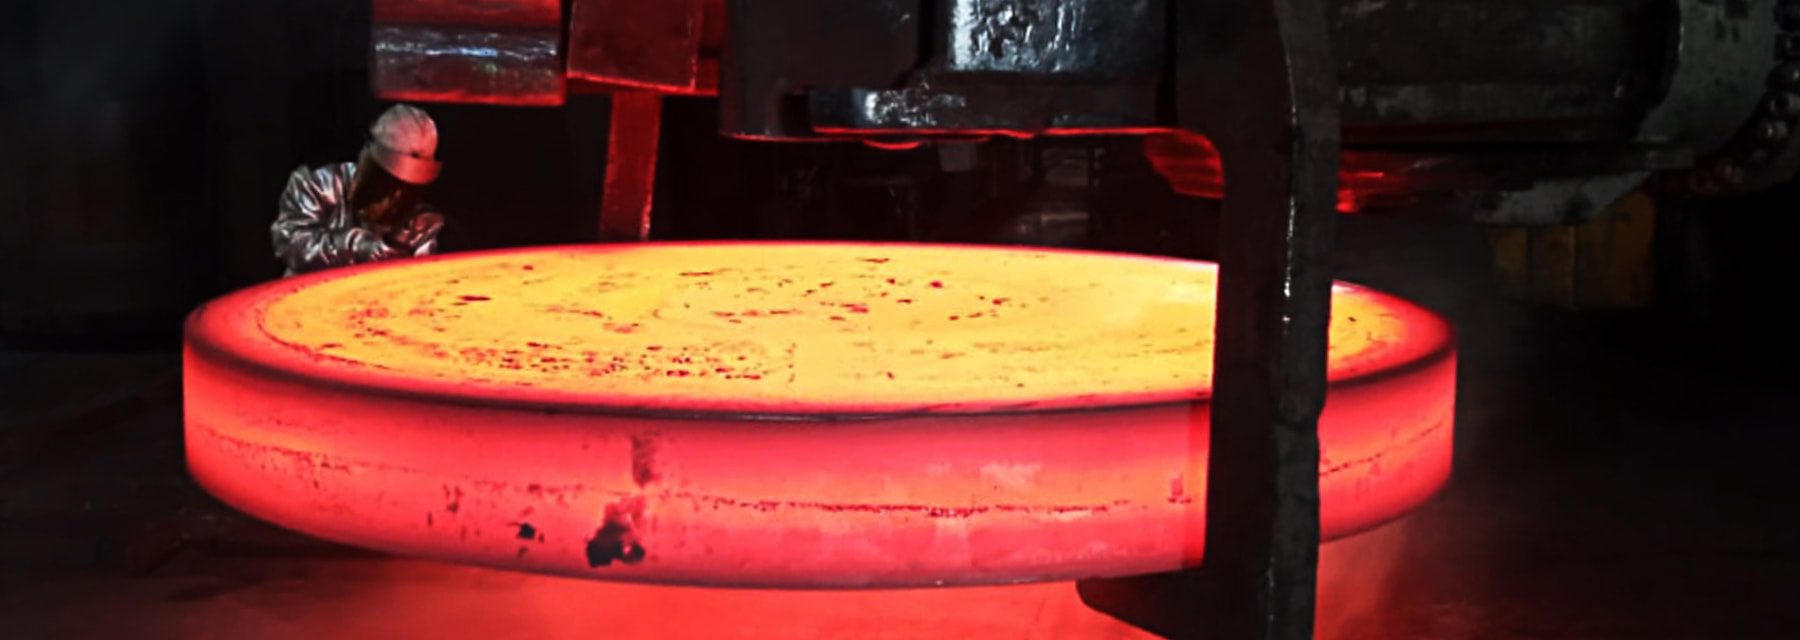 Worker inspecting a large, glowing red-hot metal disc in an industrial setting.